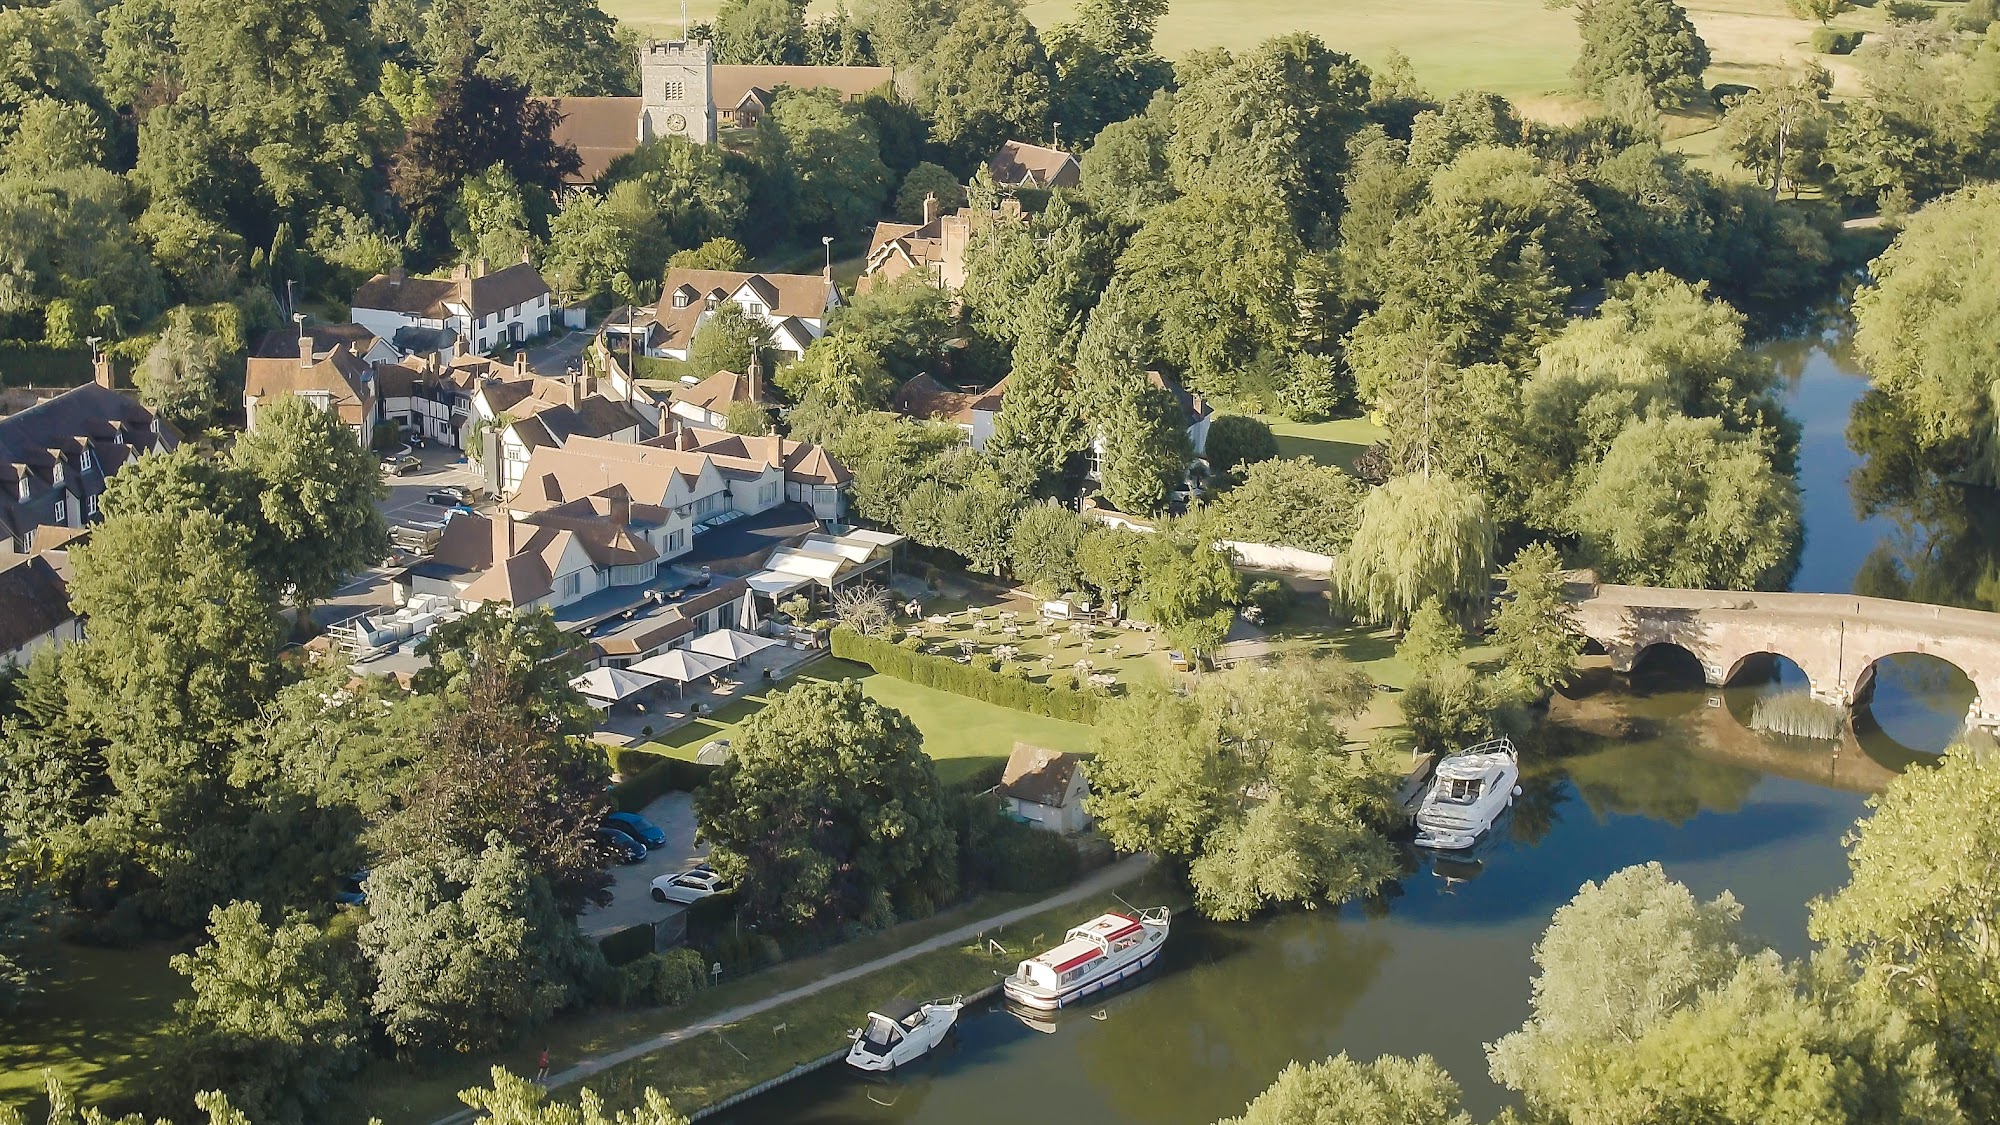 The Great House at Sonning, Coppa Club